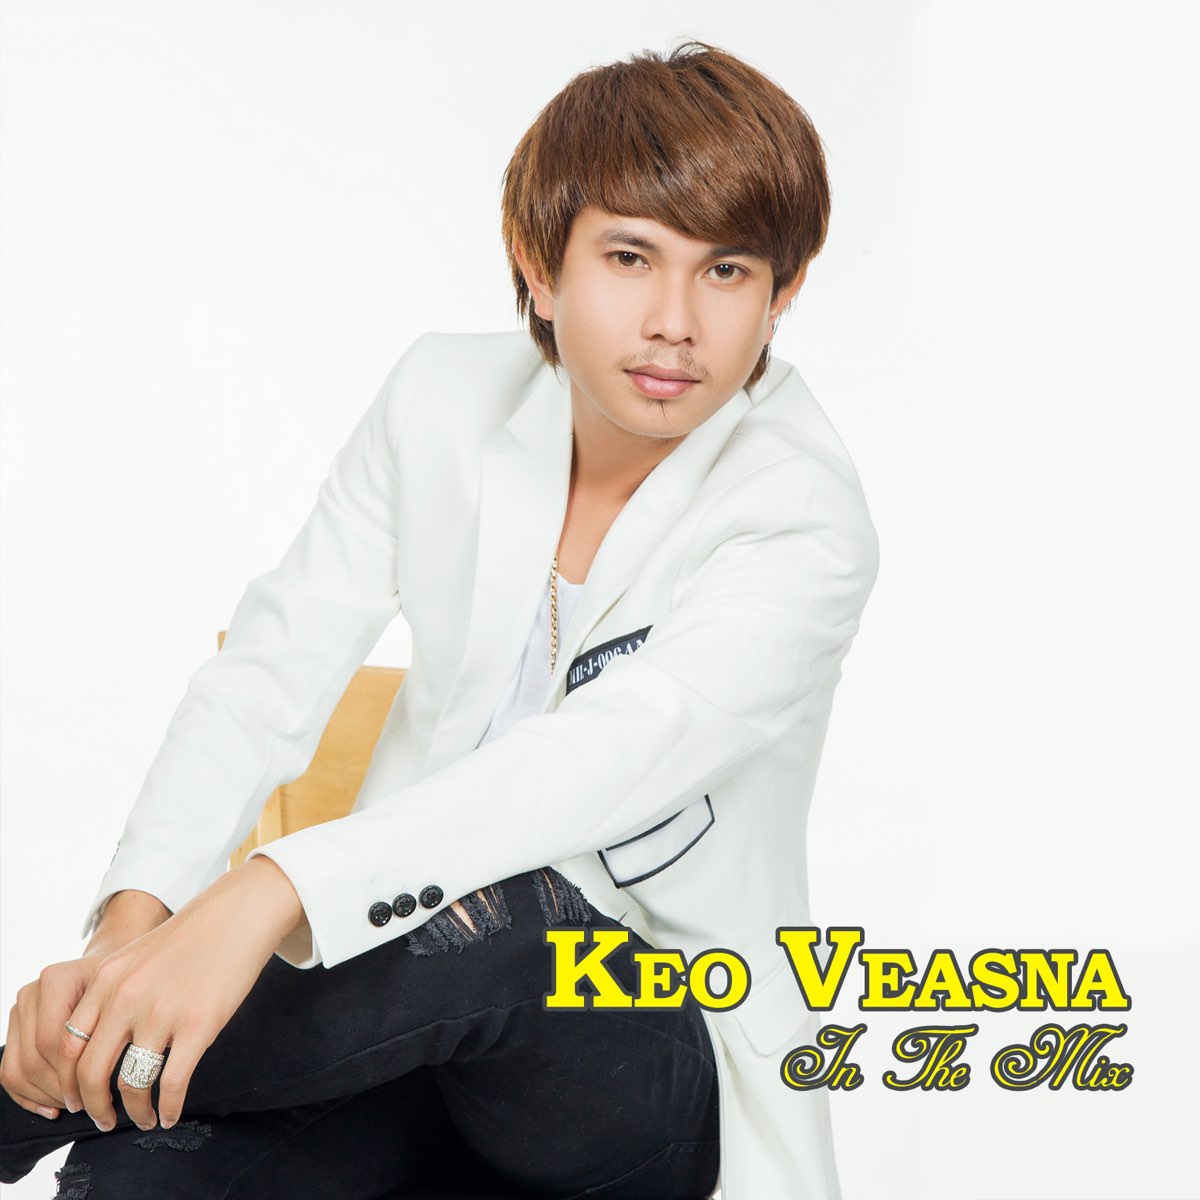 Keo Veasna in The Mix